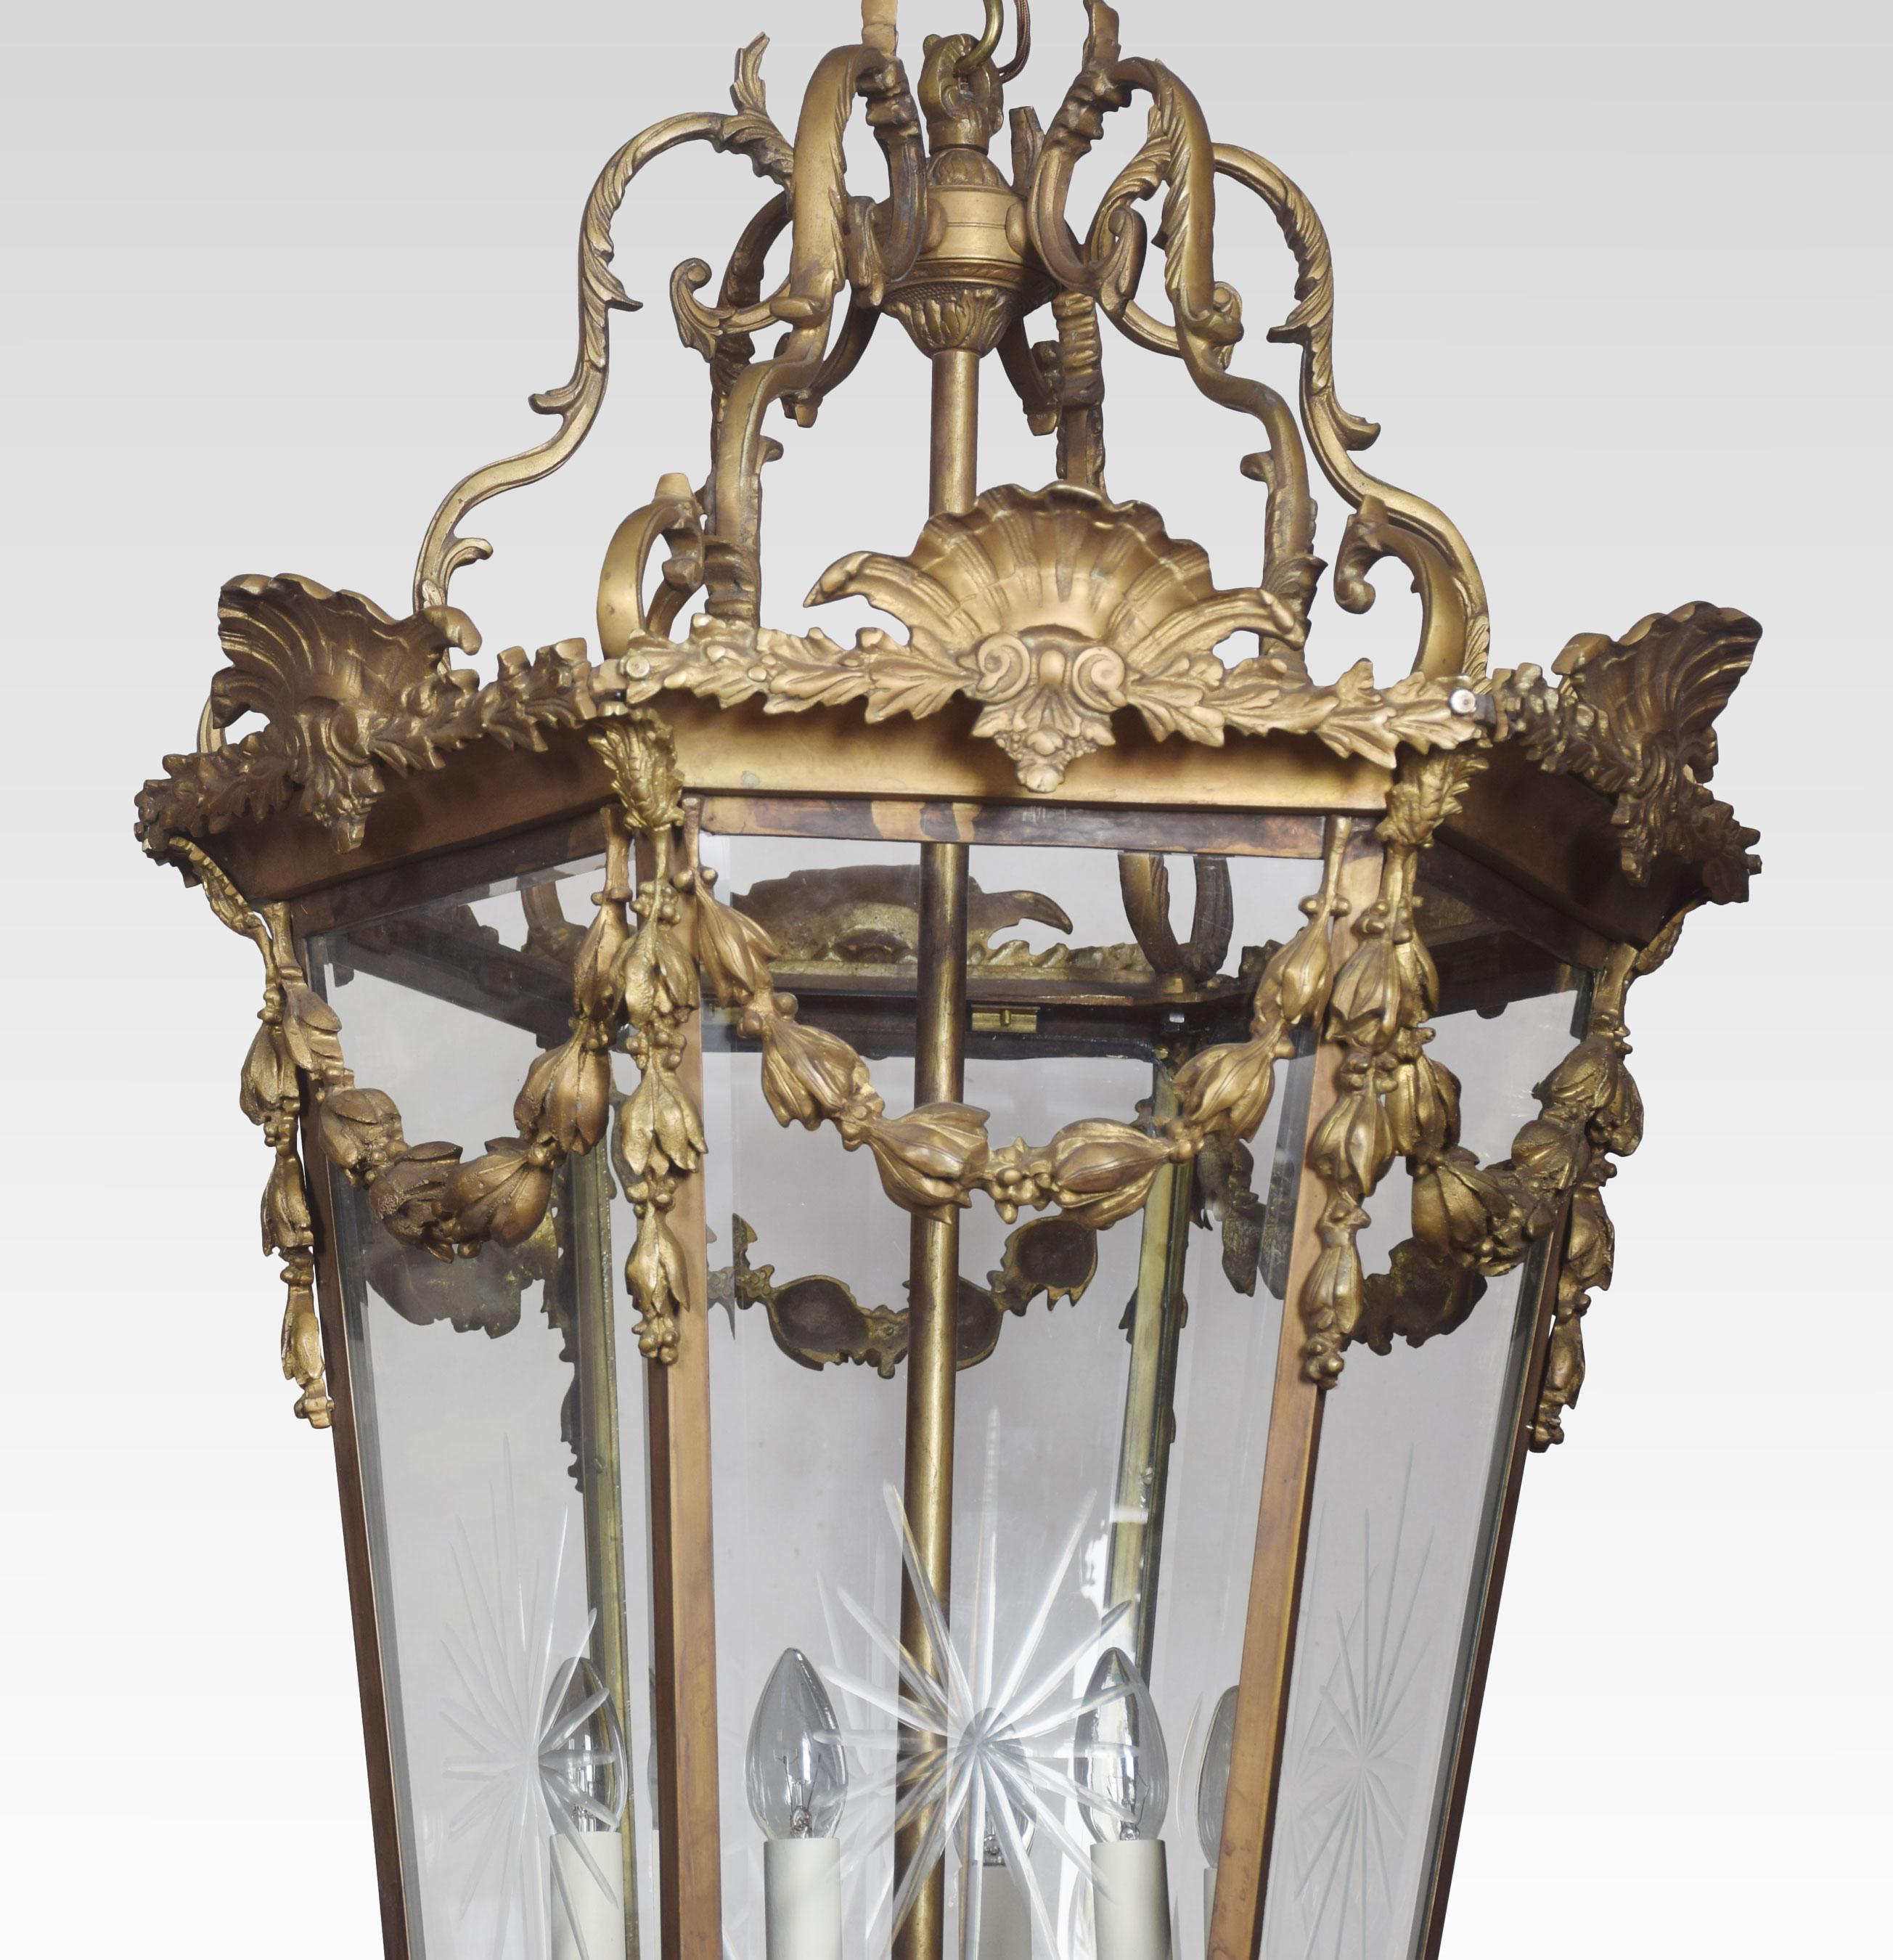 Large and imposing gilded cast brass six light lantern of hexagonal form the engraved glass panels enclosed in frame with leaf scroll crestings and floral swags. The central six lights have been rewired and tested.
Dimensions
Height 51